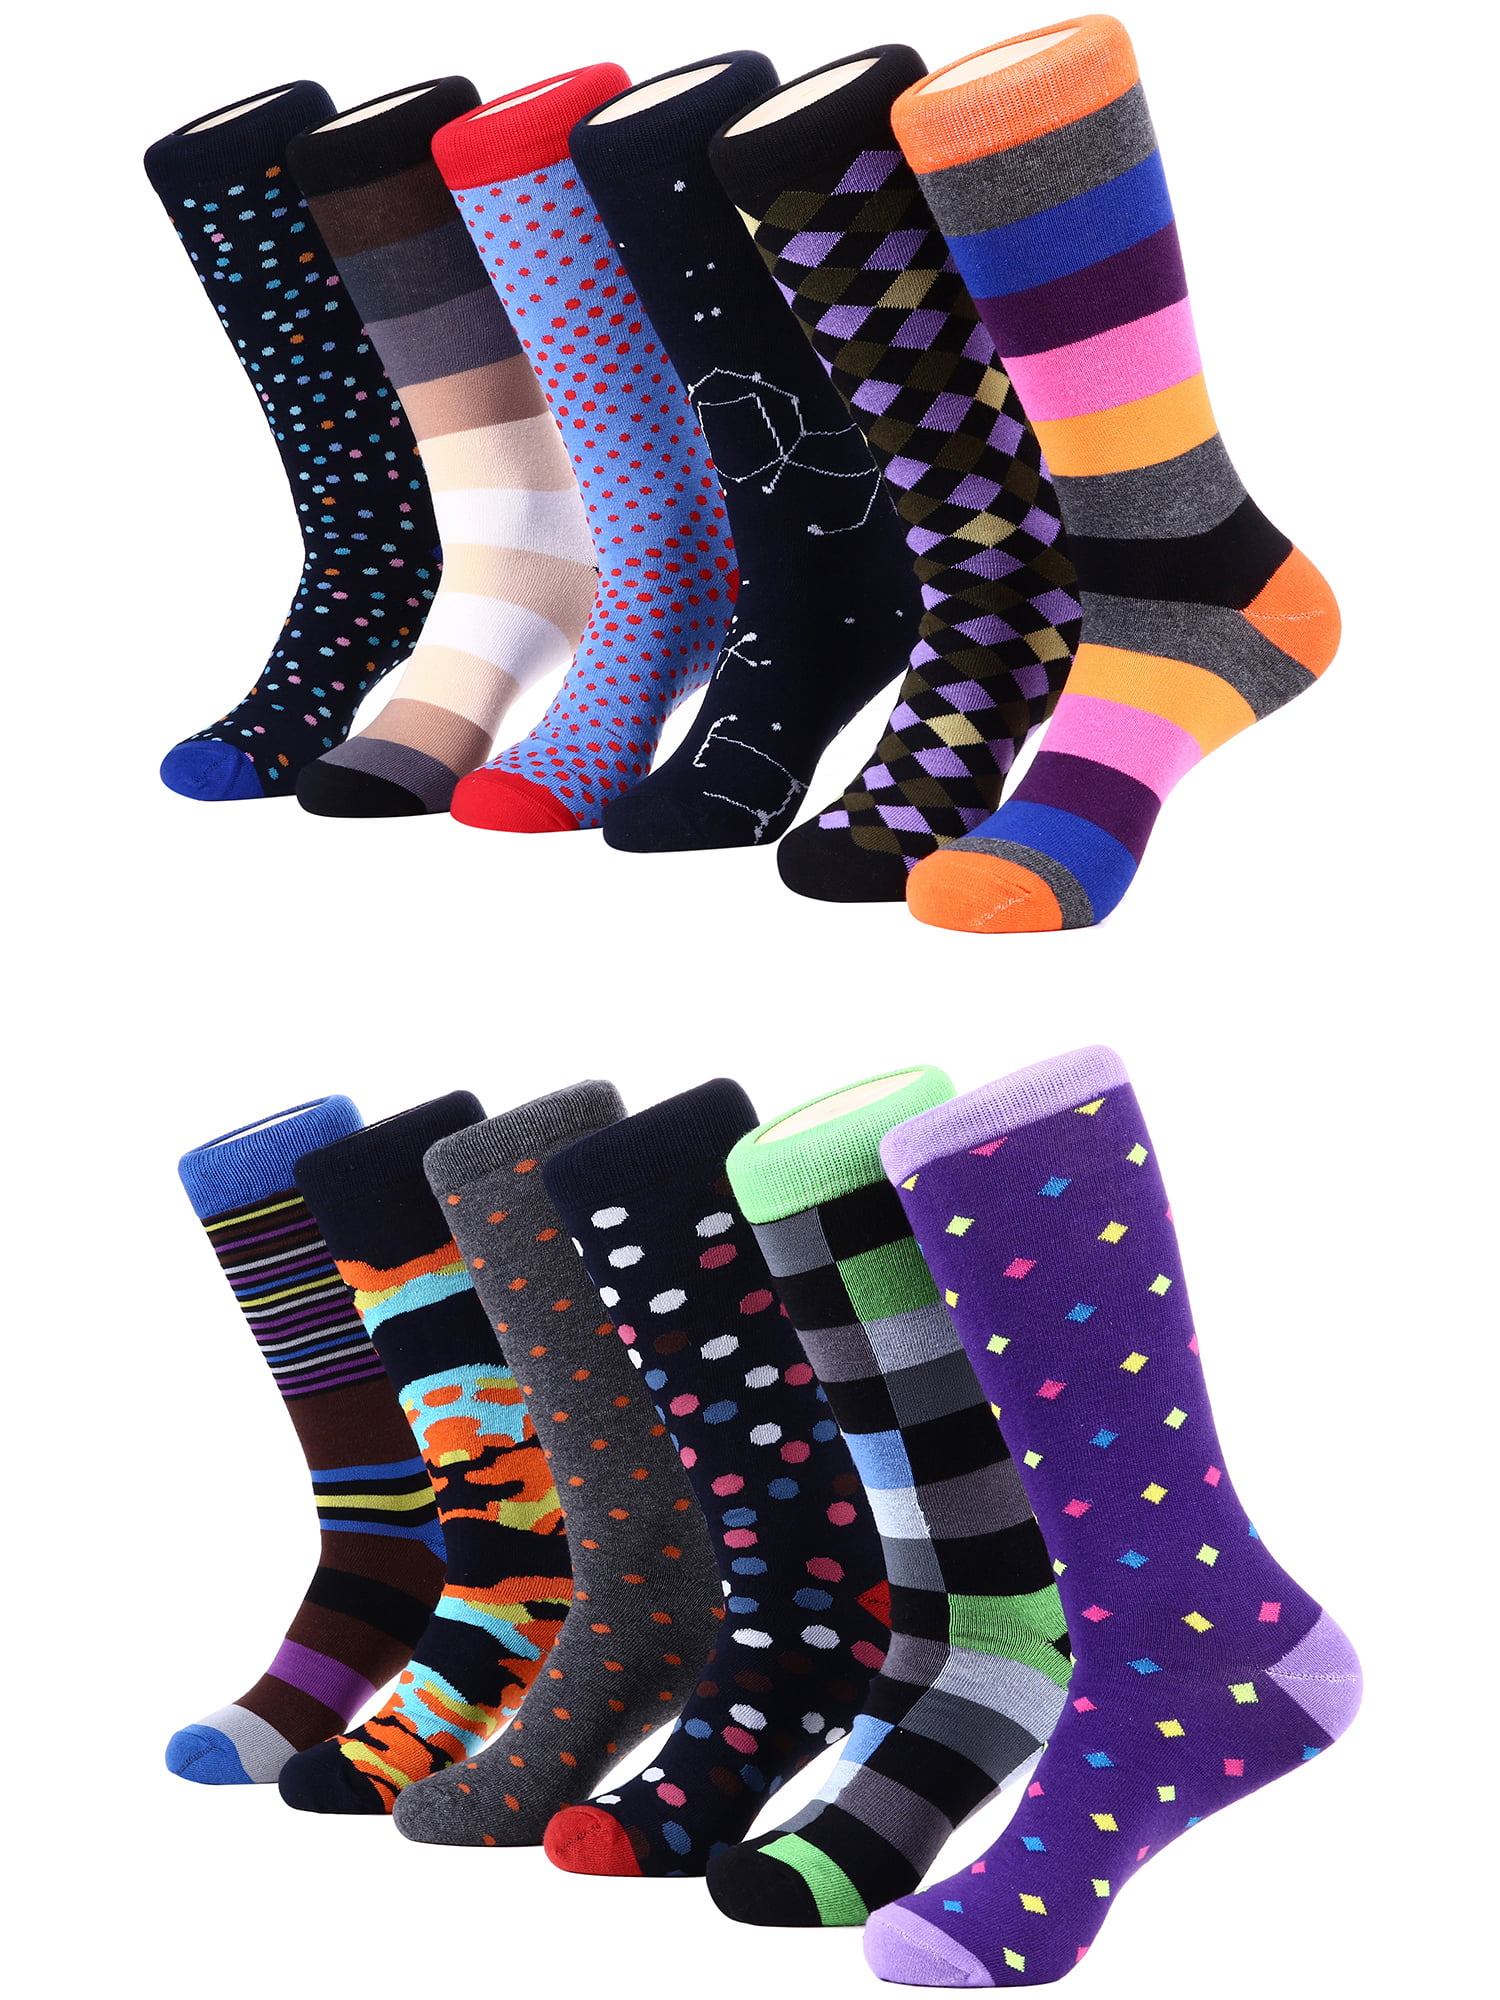 2 Pack Mens Fun Funky Colourful Cotton Rich Novelty Christmas Socks for Gift 